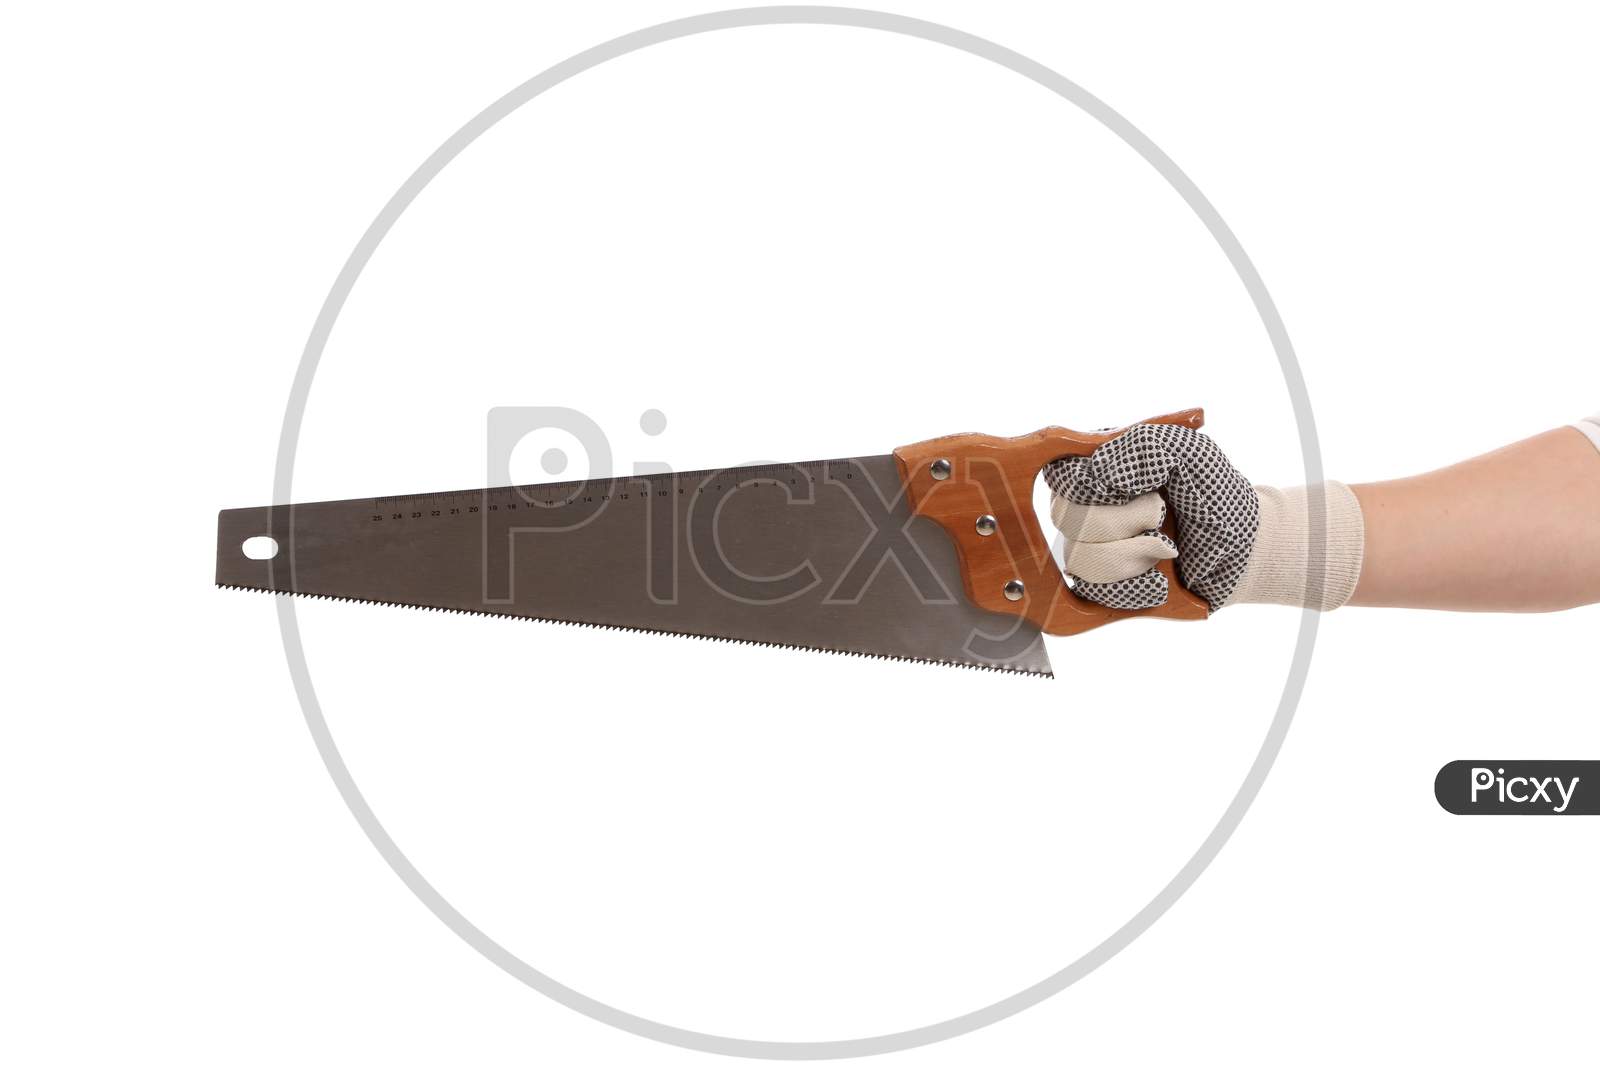 Close Up Of Hand In Gloves With Saw. Isolated On A White Background.